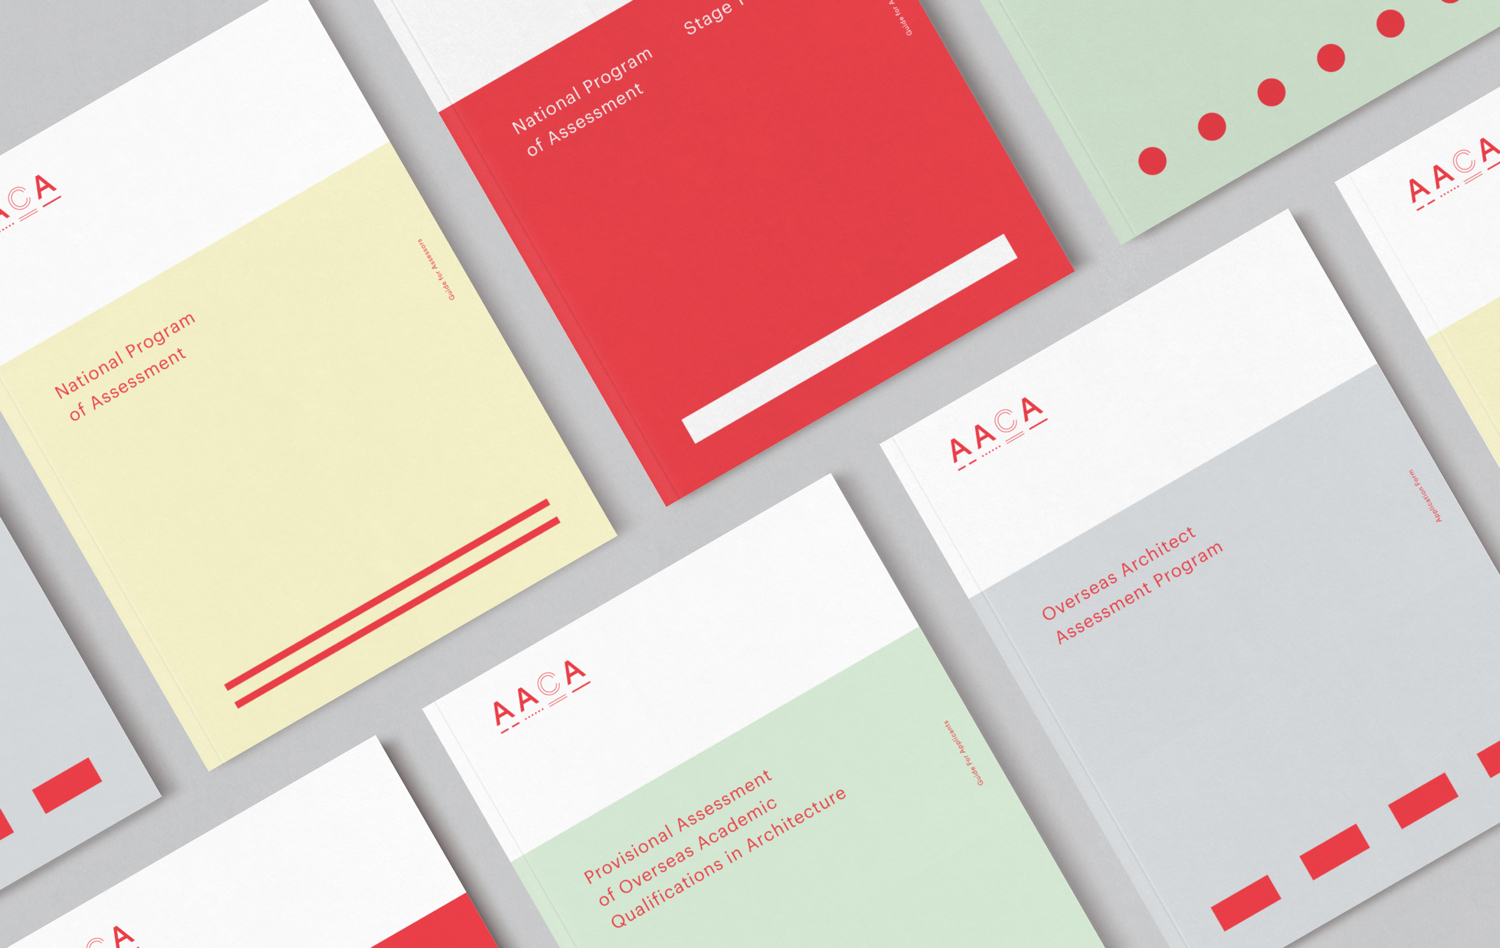 Graphic identity and documents by Toko for Architects Accreditation Council Of Australia